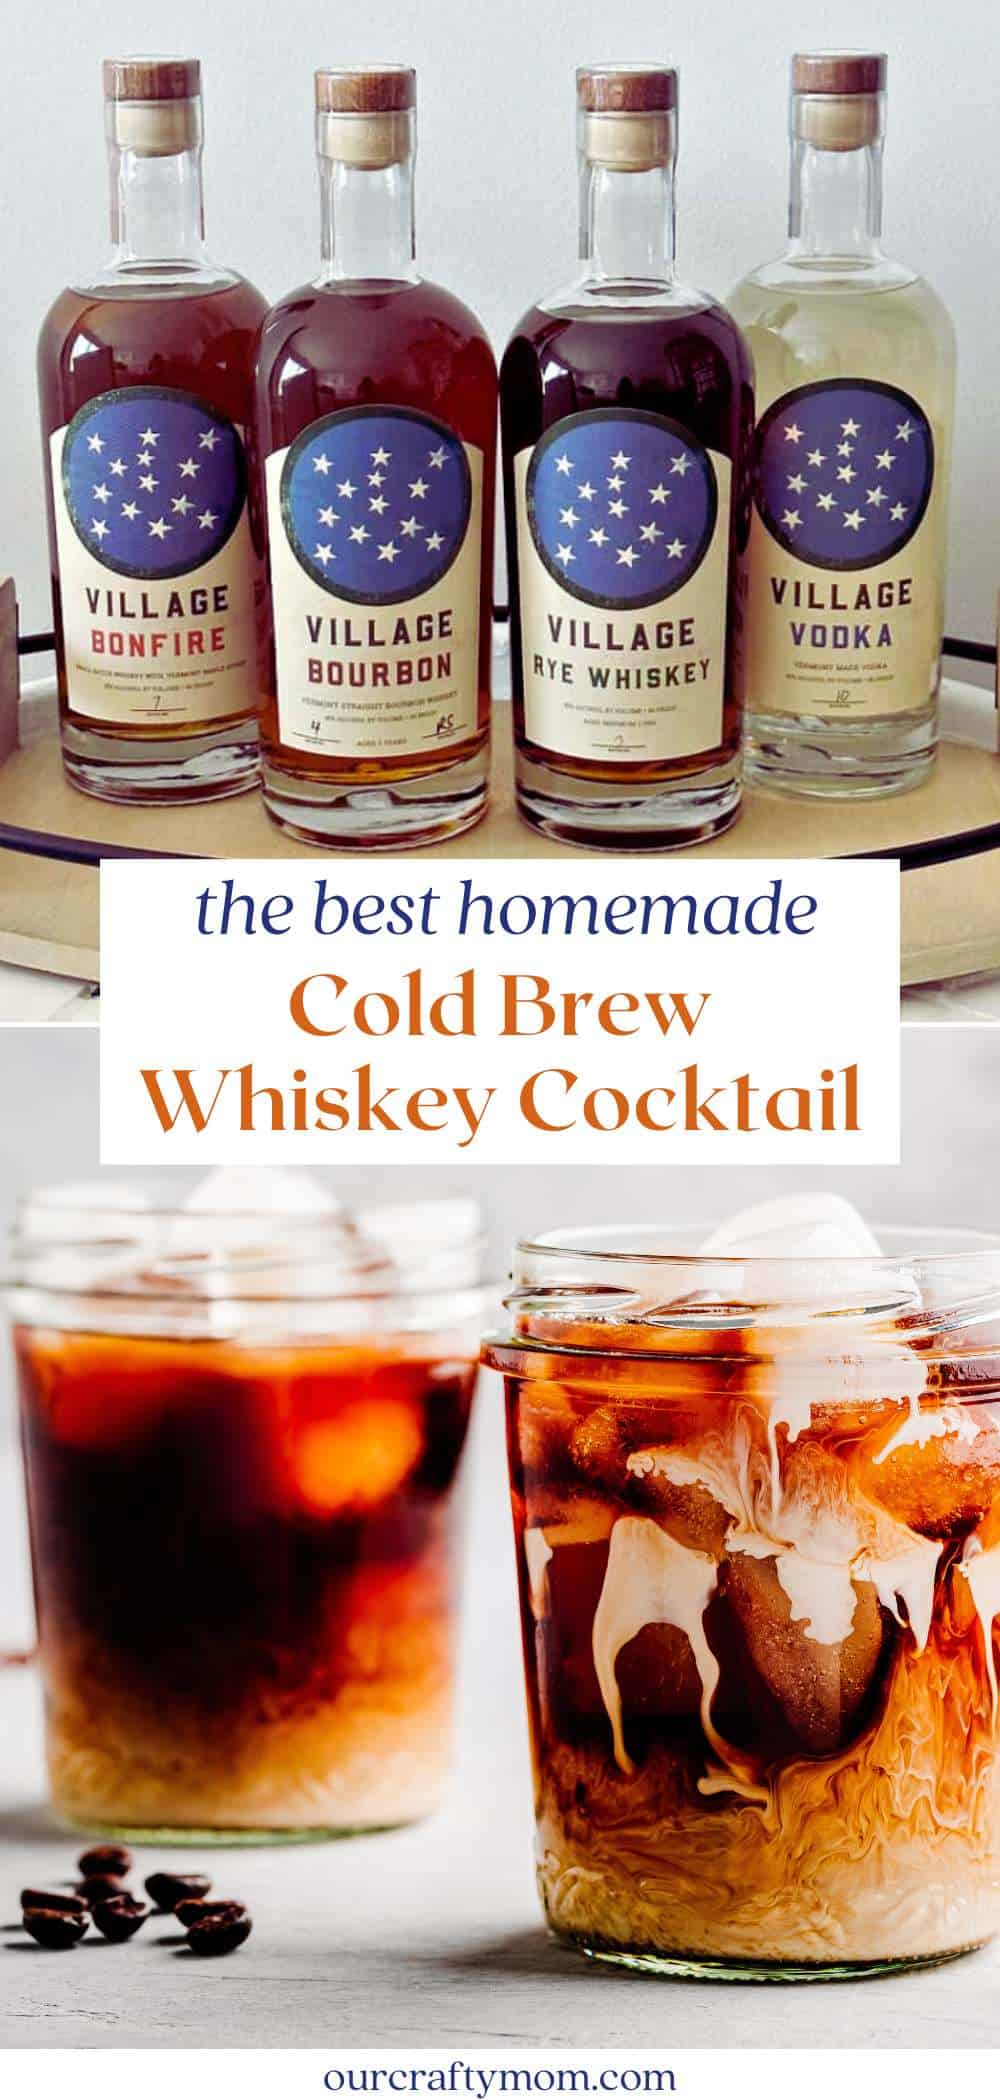 https://ourcraftymom.com/wp-content/uploads/2023/06/Cold-Brew-Coffee-Whiskey-Cocktail-19.jpg